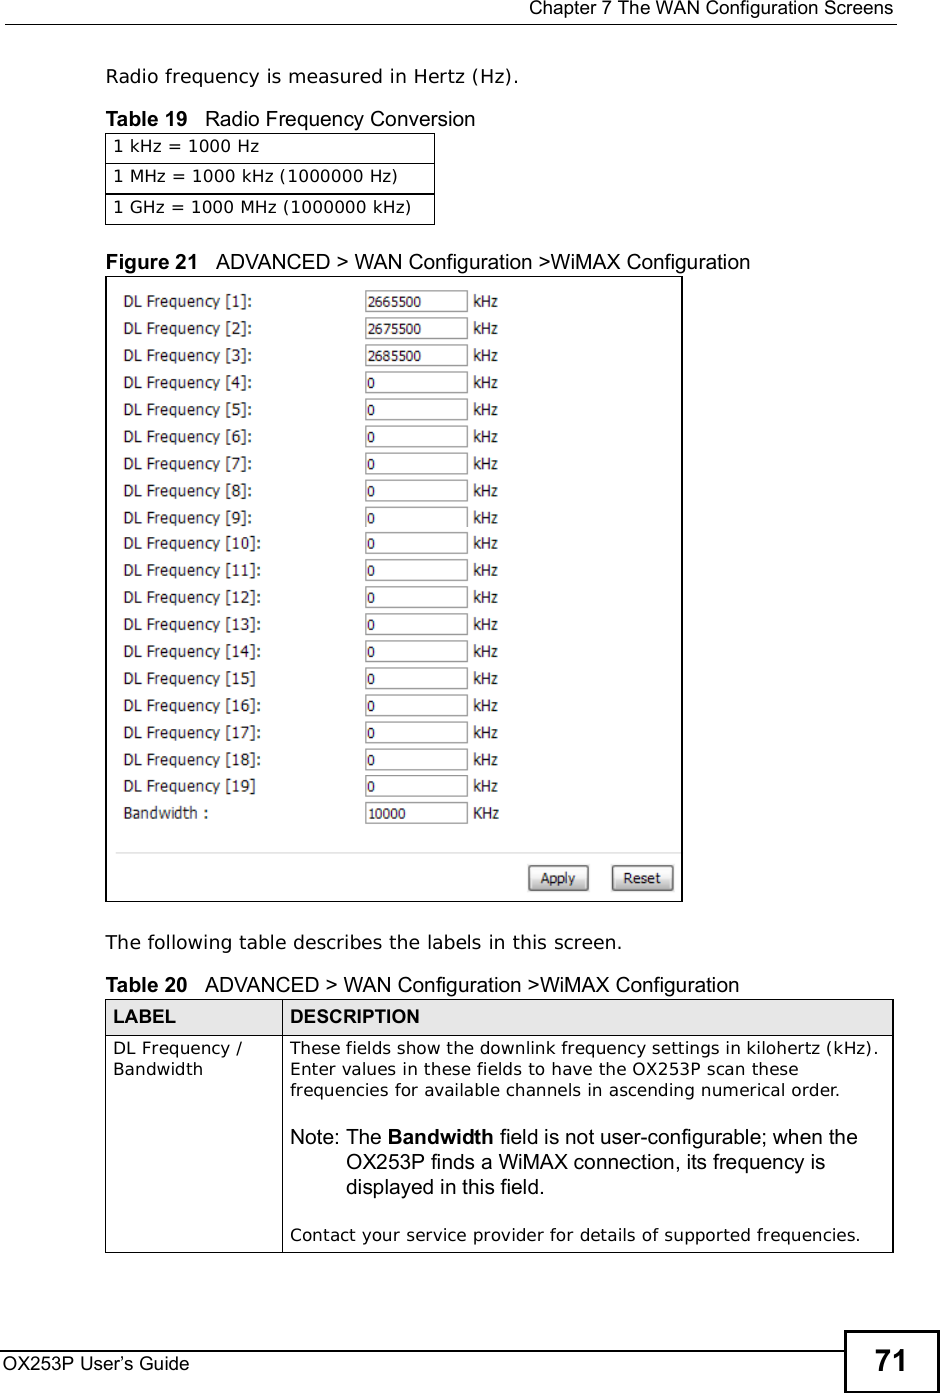  Chapter 7The WAN Configuration ScreensOX253P User’s Guide 71Radio frequency is measured in Hertz (Hz). Figure 21   ADVANCED &gt; WAN Configuration &gt;WiMAX Configuration   The following table describes the labels in this screen.Table 19   Radio Frequency Conversion1 kHz = 1000 Hz1 MHz = 1000 kHz (1000000 Hz)1 GHz = 1000 MHz (1000000 kHz)Table 20   ADVANCED &gt; WAN Configuration &gt;WiMAX ConfigurationLABEL DESCRIPTIONDL Frequency / Bandwidth These fields show the downlink frequency settings in kilohertz (kHz). Enter values in these fields to have the OX253P scan these frequencies for available channels in ascending numerical order.Note: The Bandwidth field is not user-configurable; when the OX253P finds a WiMAX connection, its frequency is displayed in this field.Contact your service provider for details of supported frequencies.